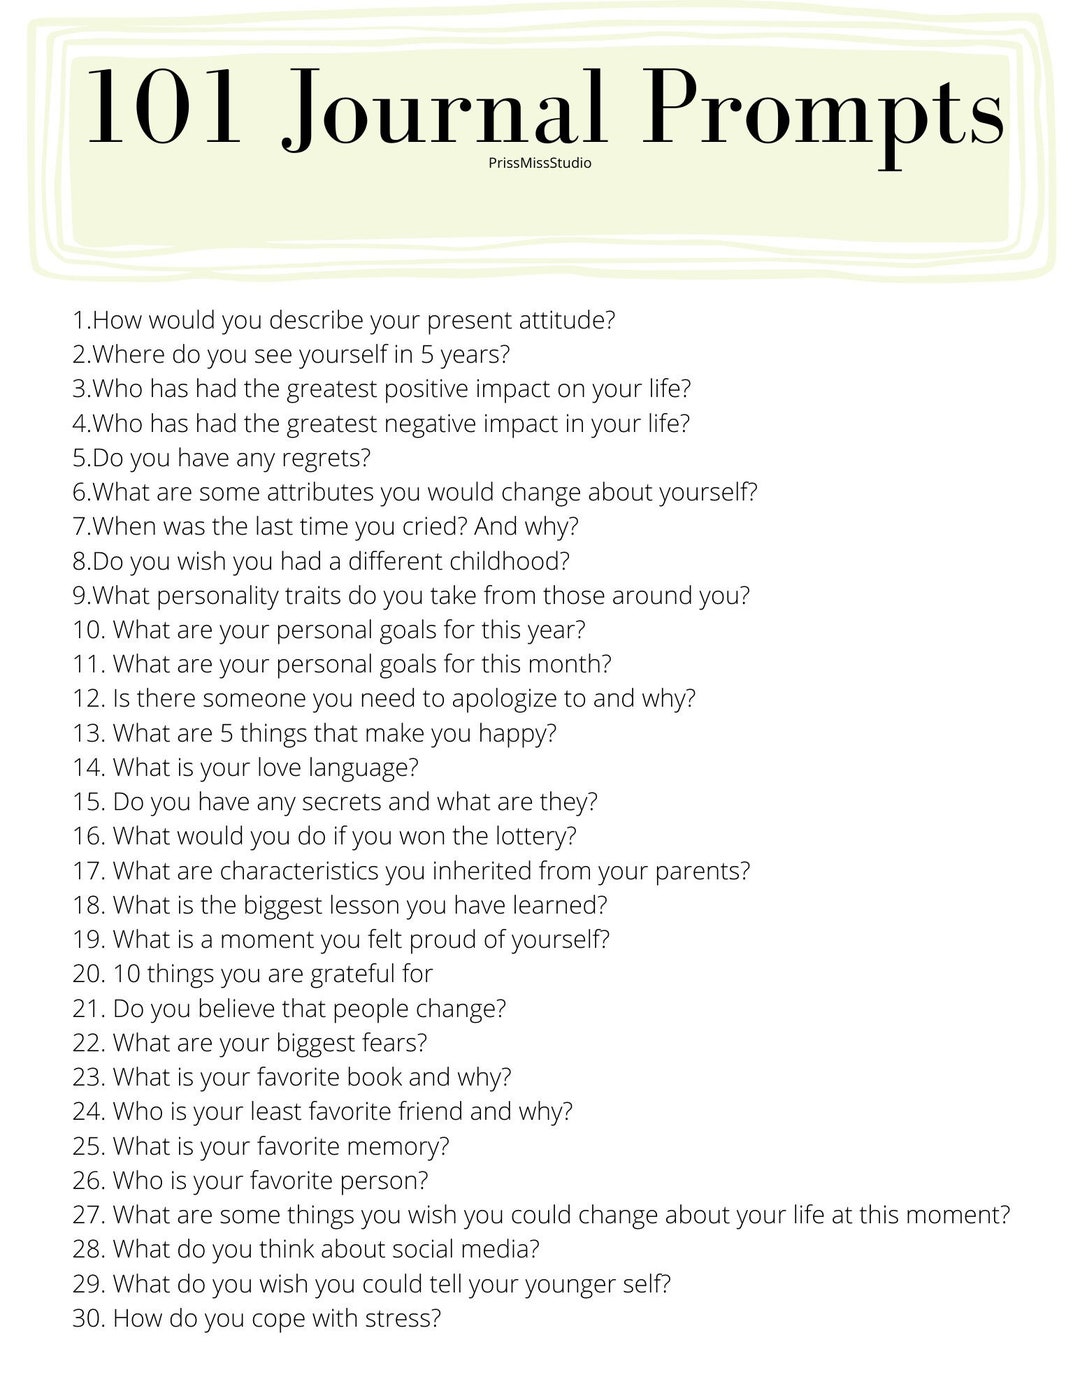 101 JOURNAL PROMPTS Digital Link Ready for Download - Etsy